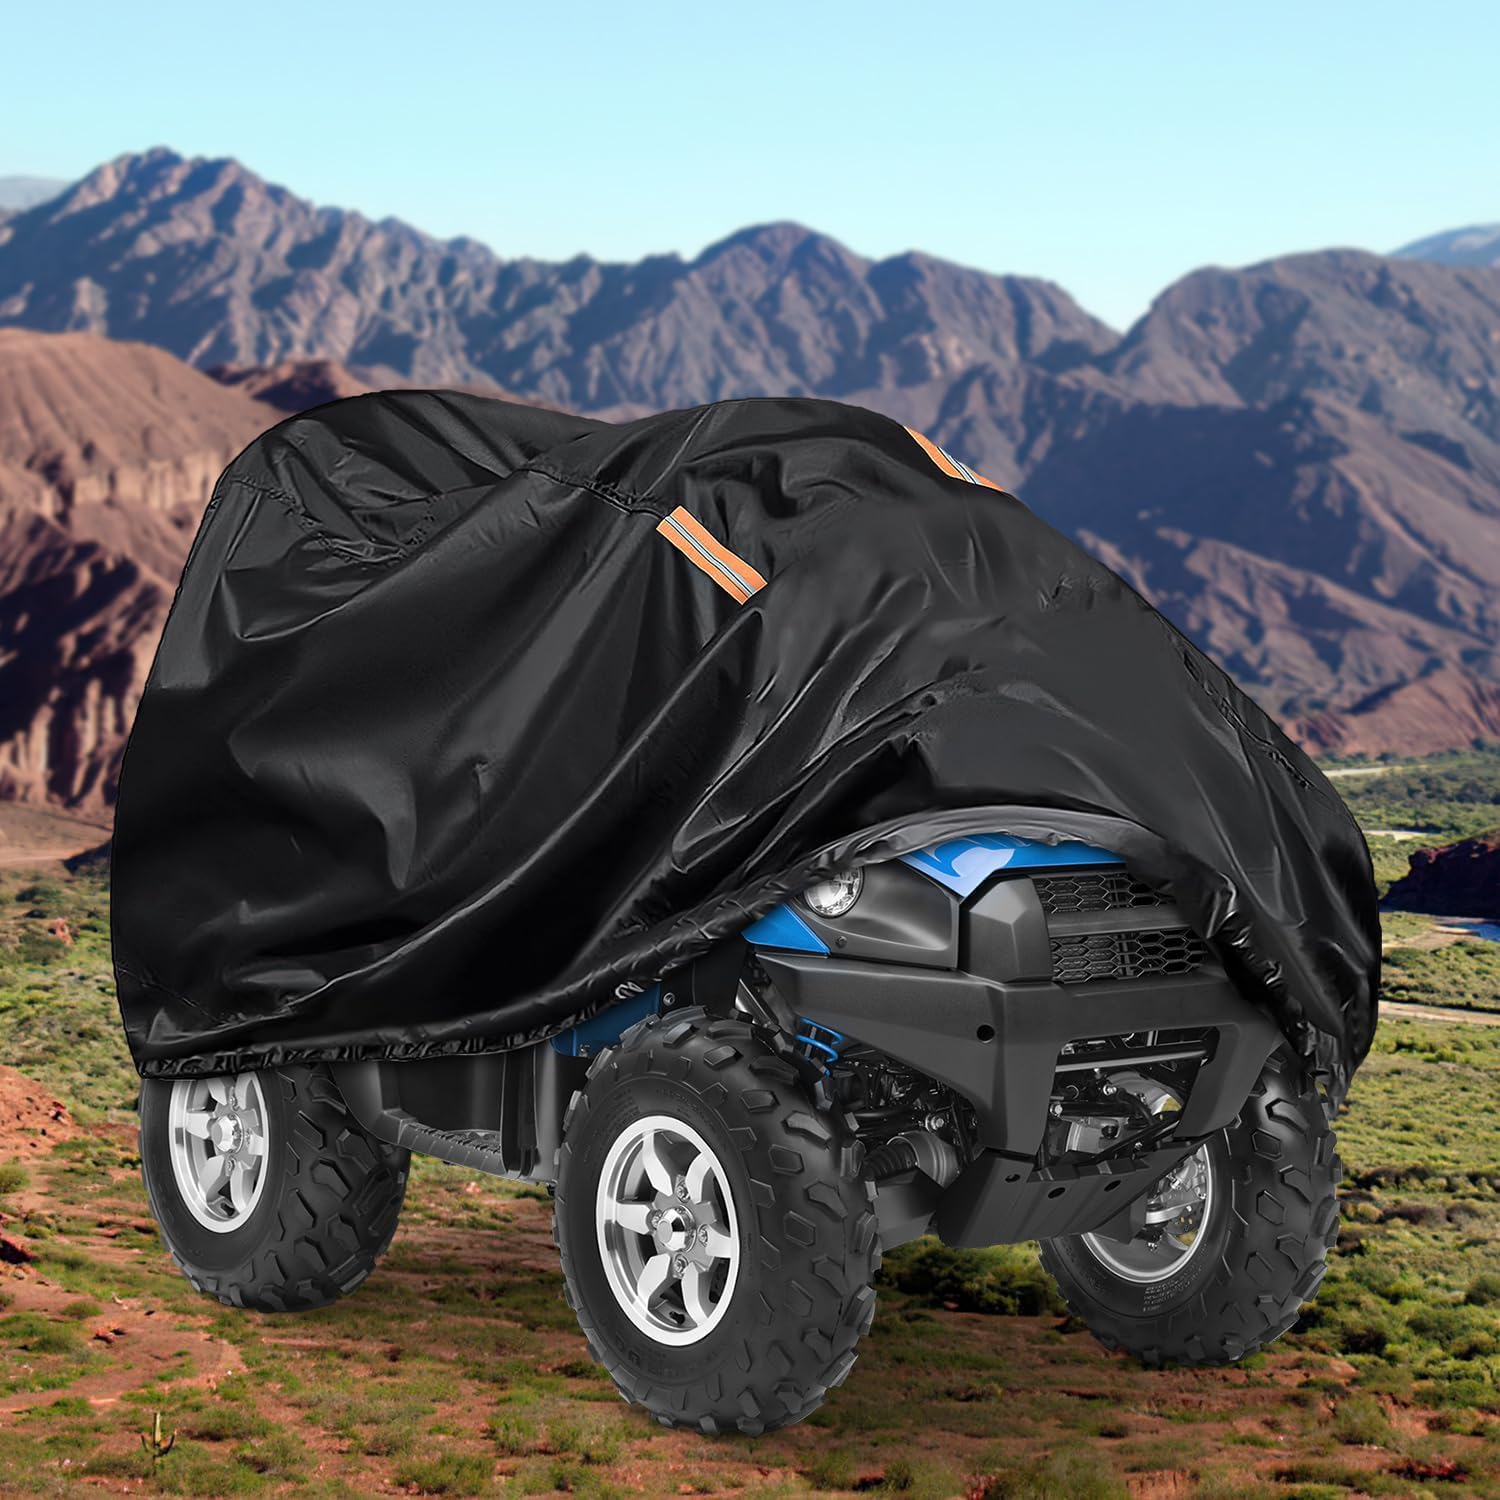 ATV Cover Waterproof 420D Heavy Duty Ripstop Material Black Protects 4 Wheeler from Snow Rain All Season All Weather UV Protection Fits up to 100" Nilight